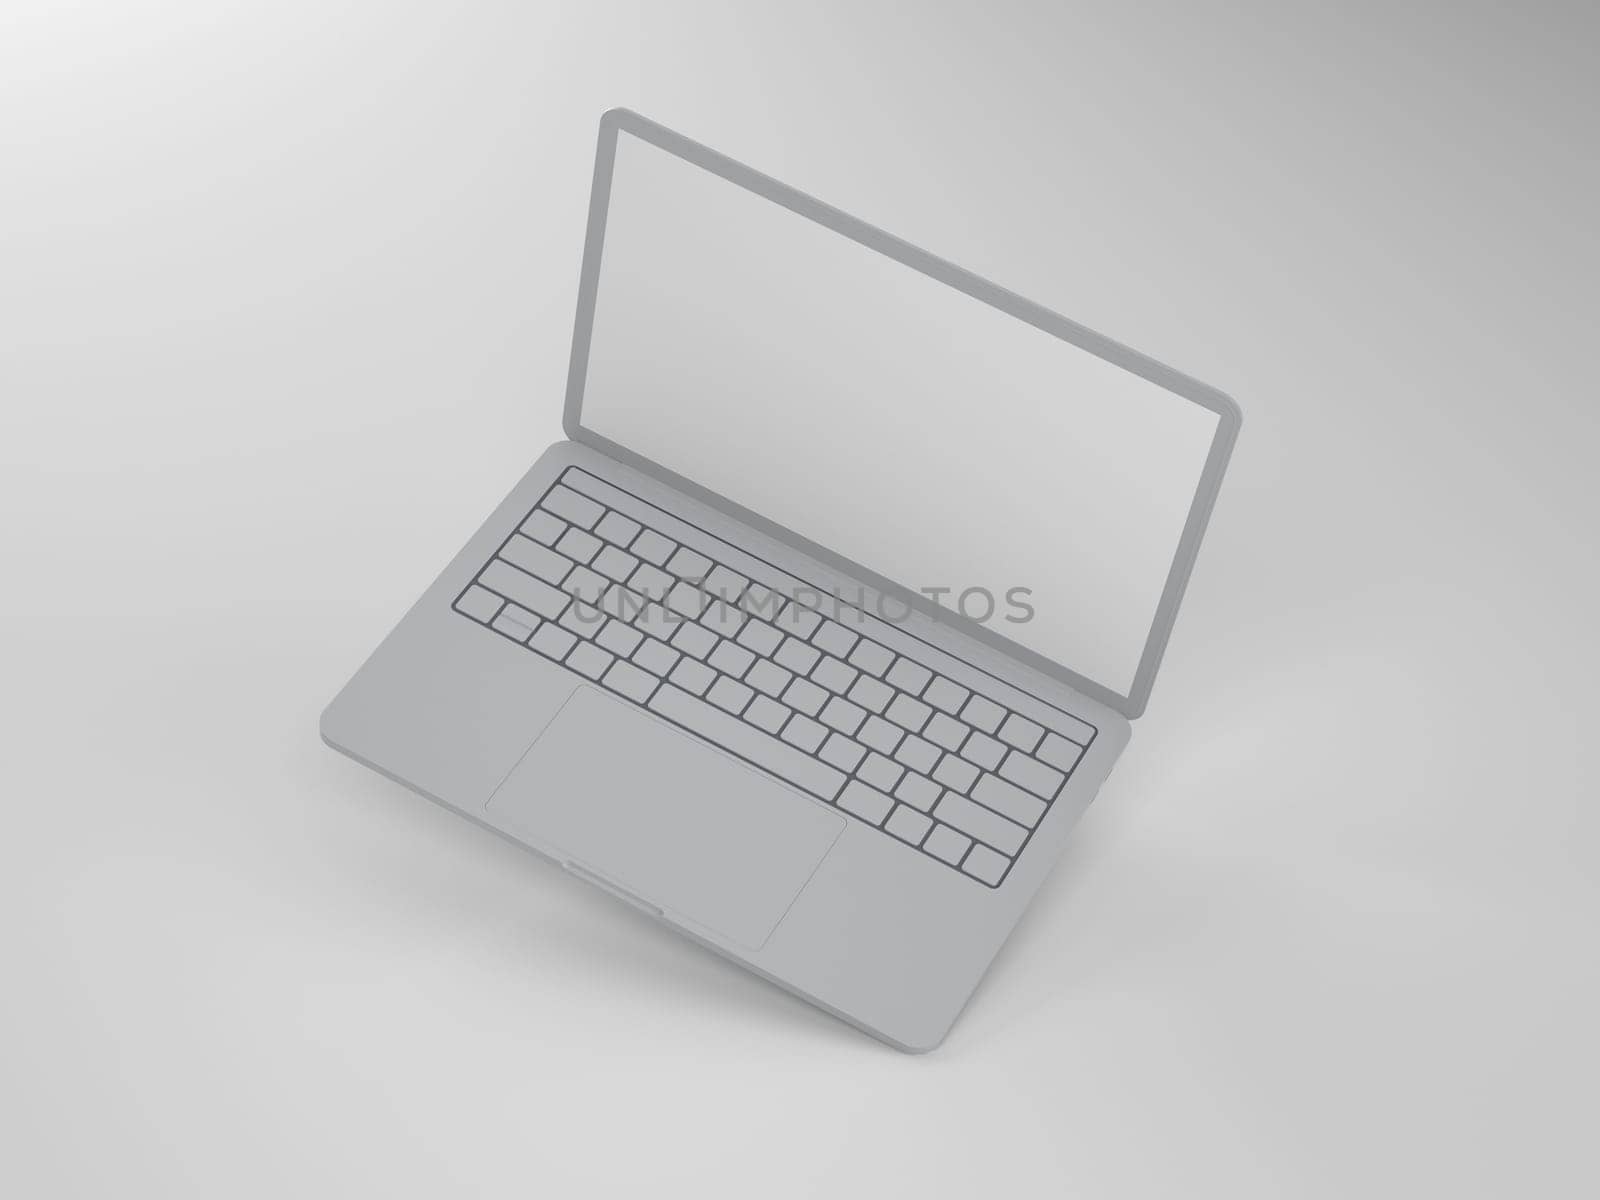 A thin gray laptop on a light background by Mastak80